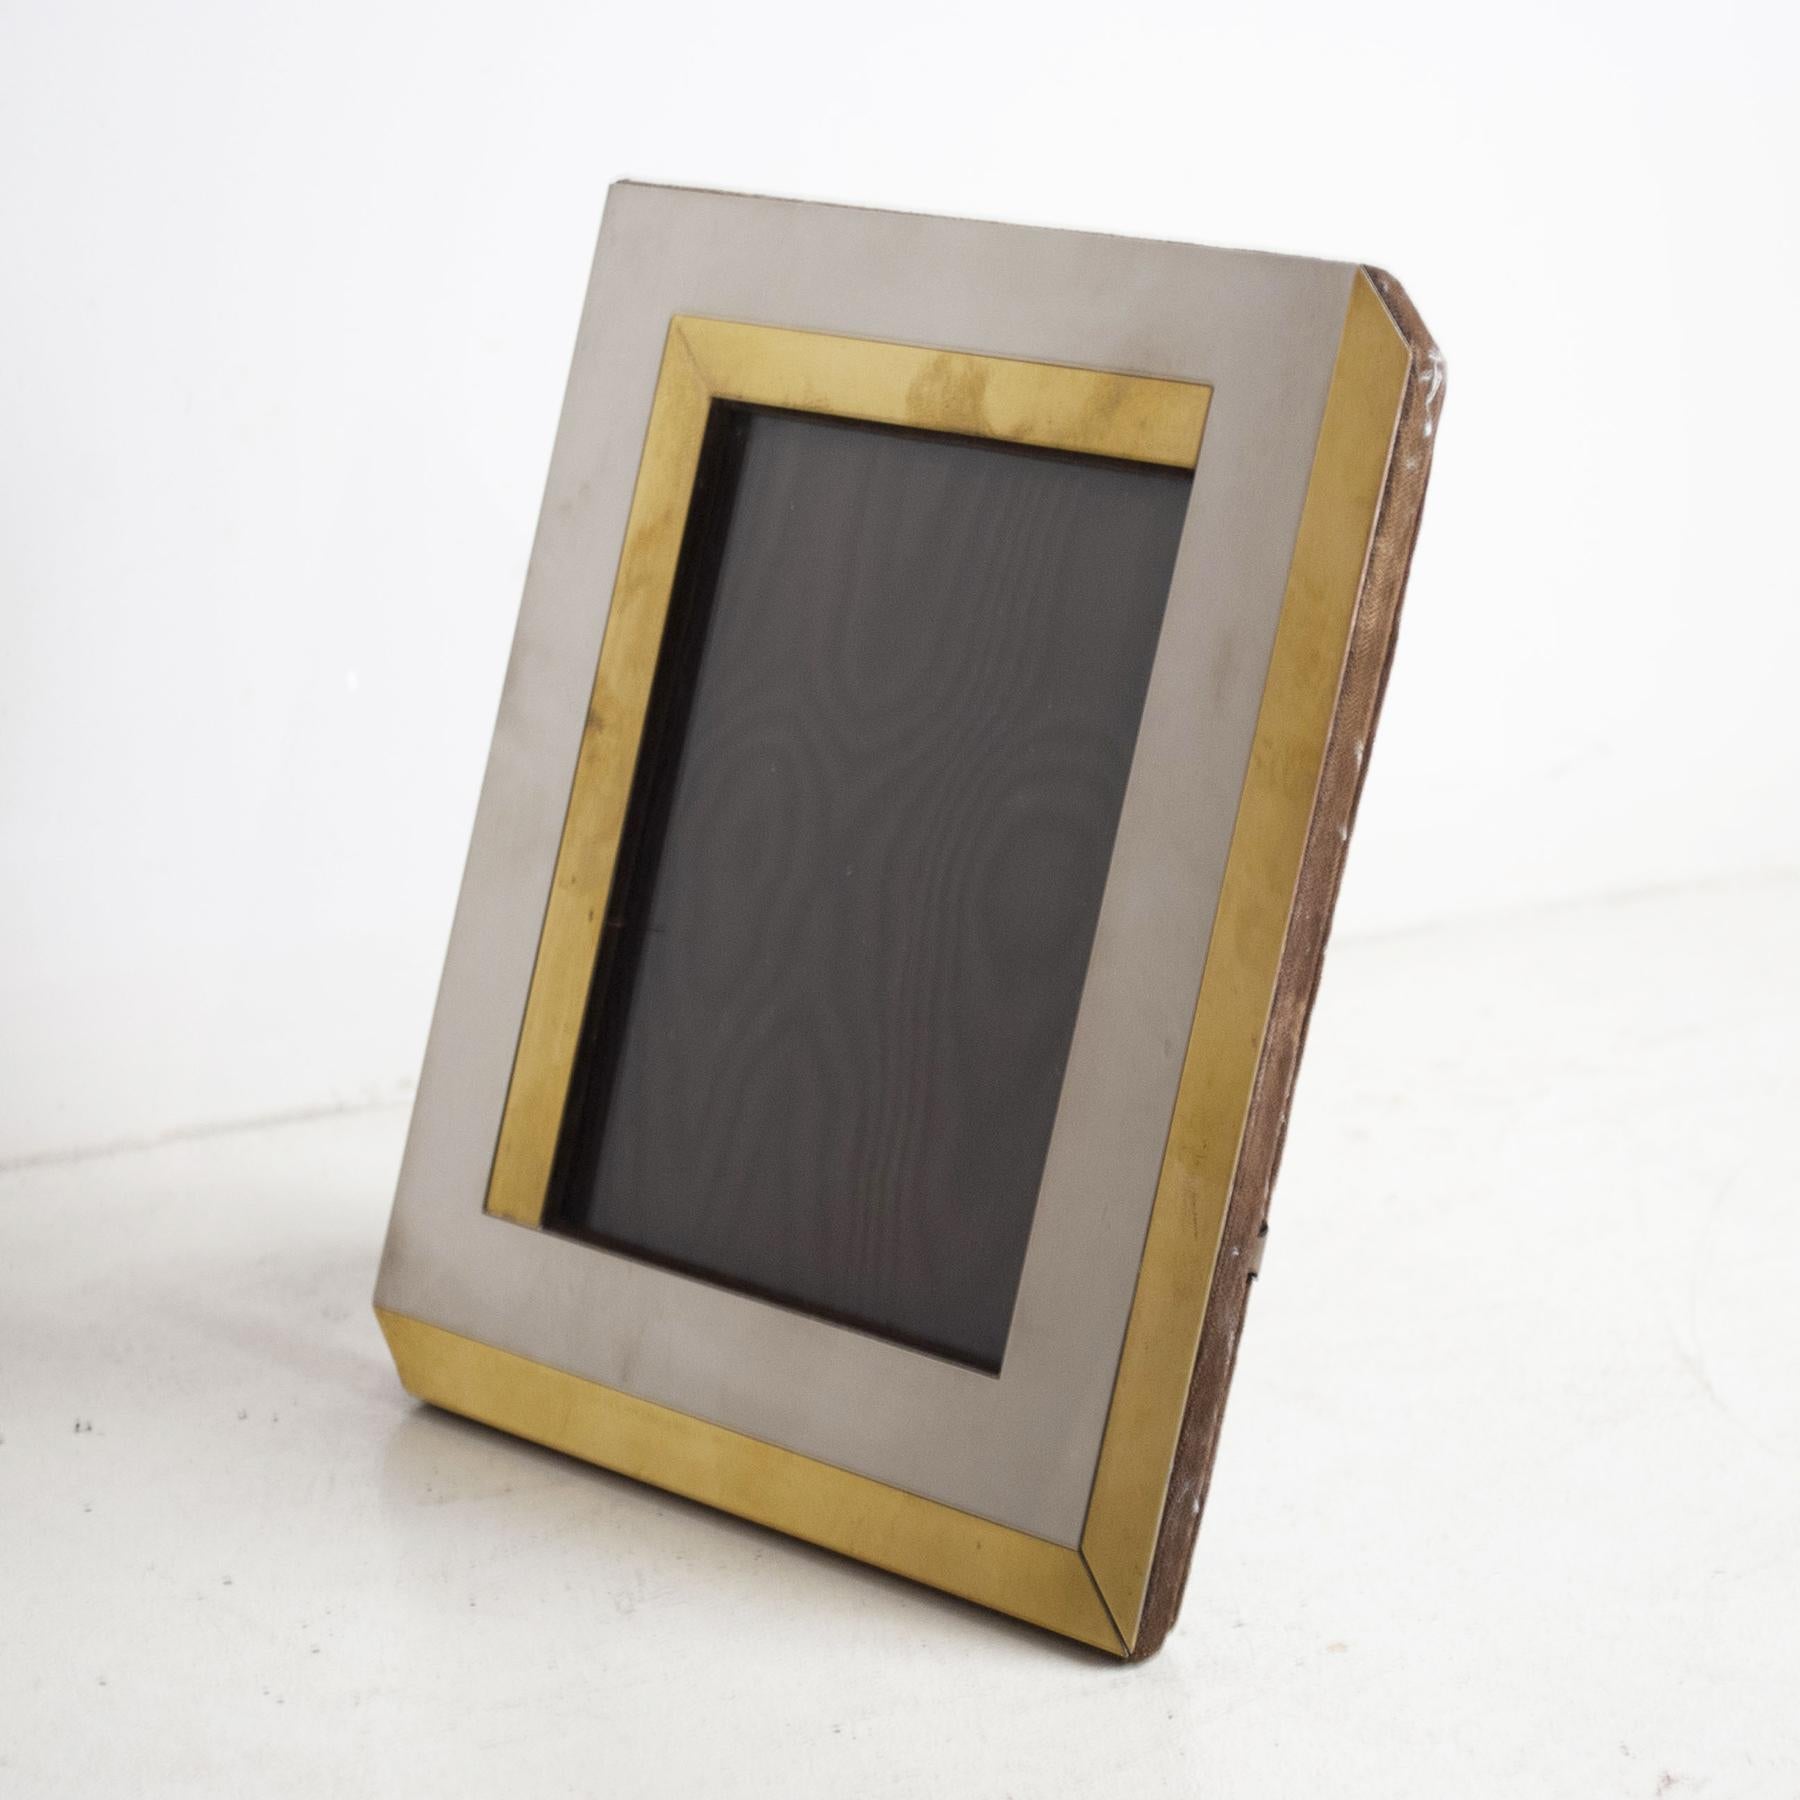 Very elegant rectangular photo holder in the 70s Romeo Rega style.

N.B. space for photography 12 × 17.